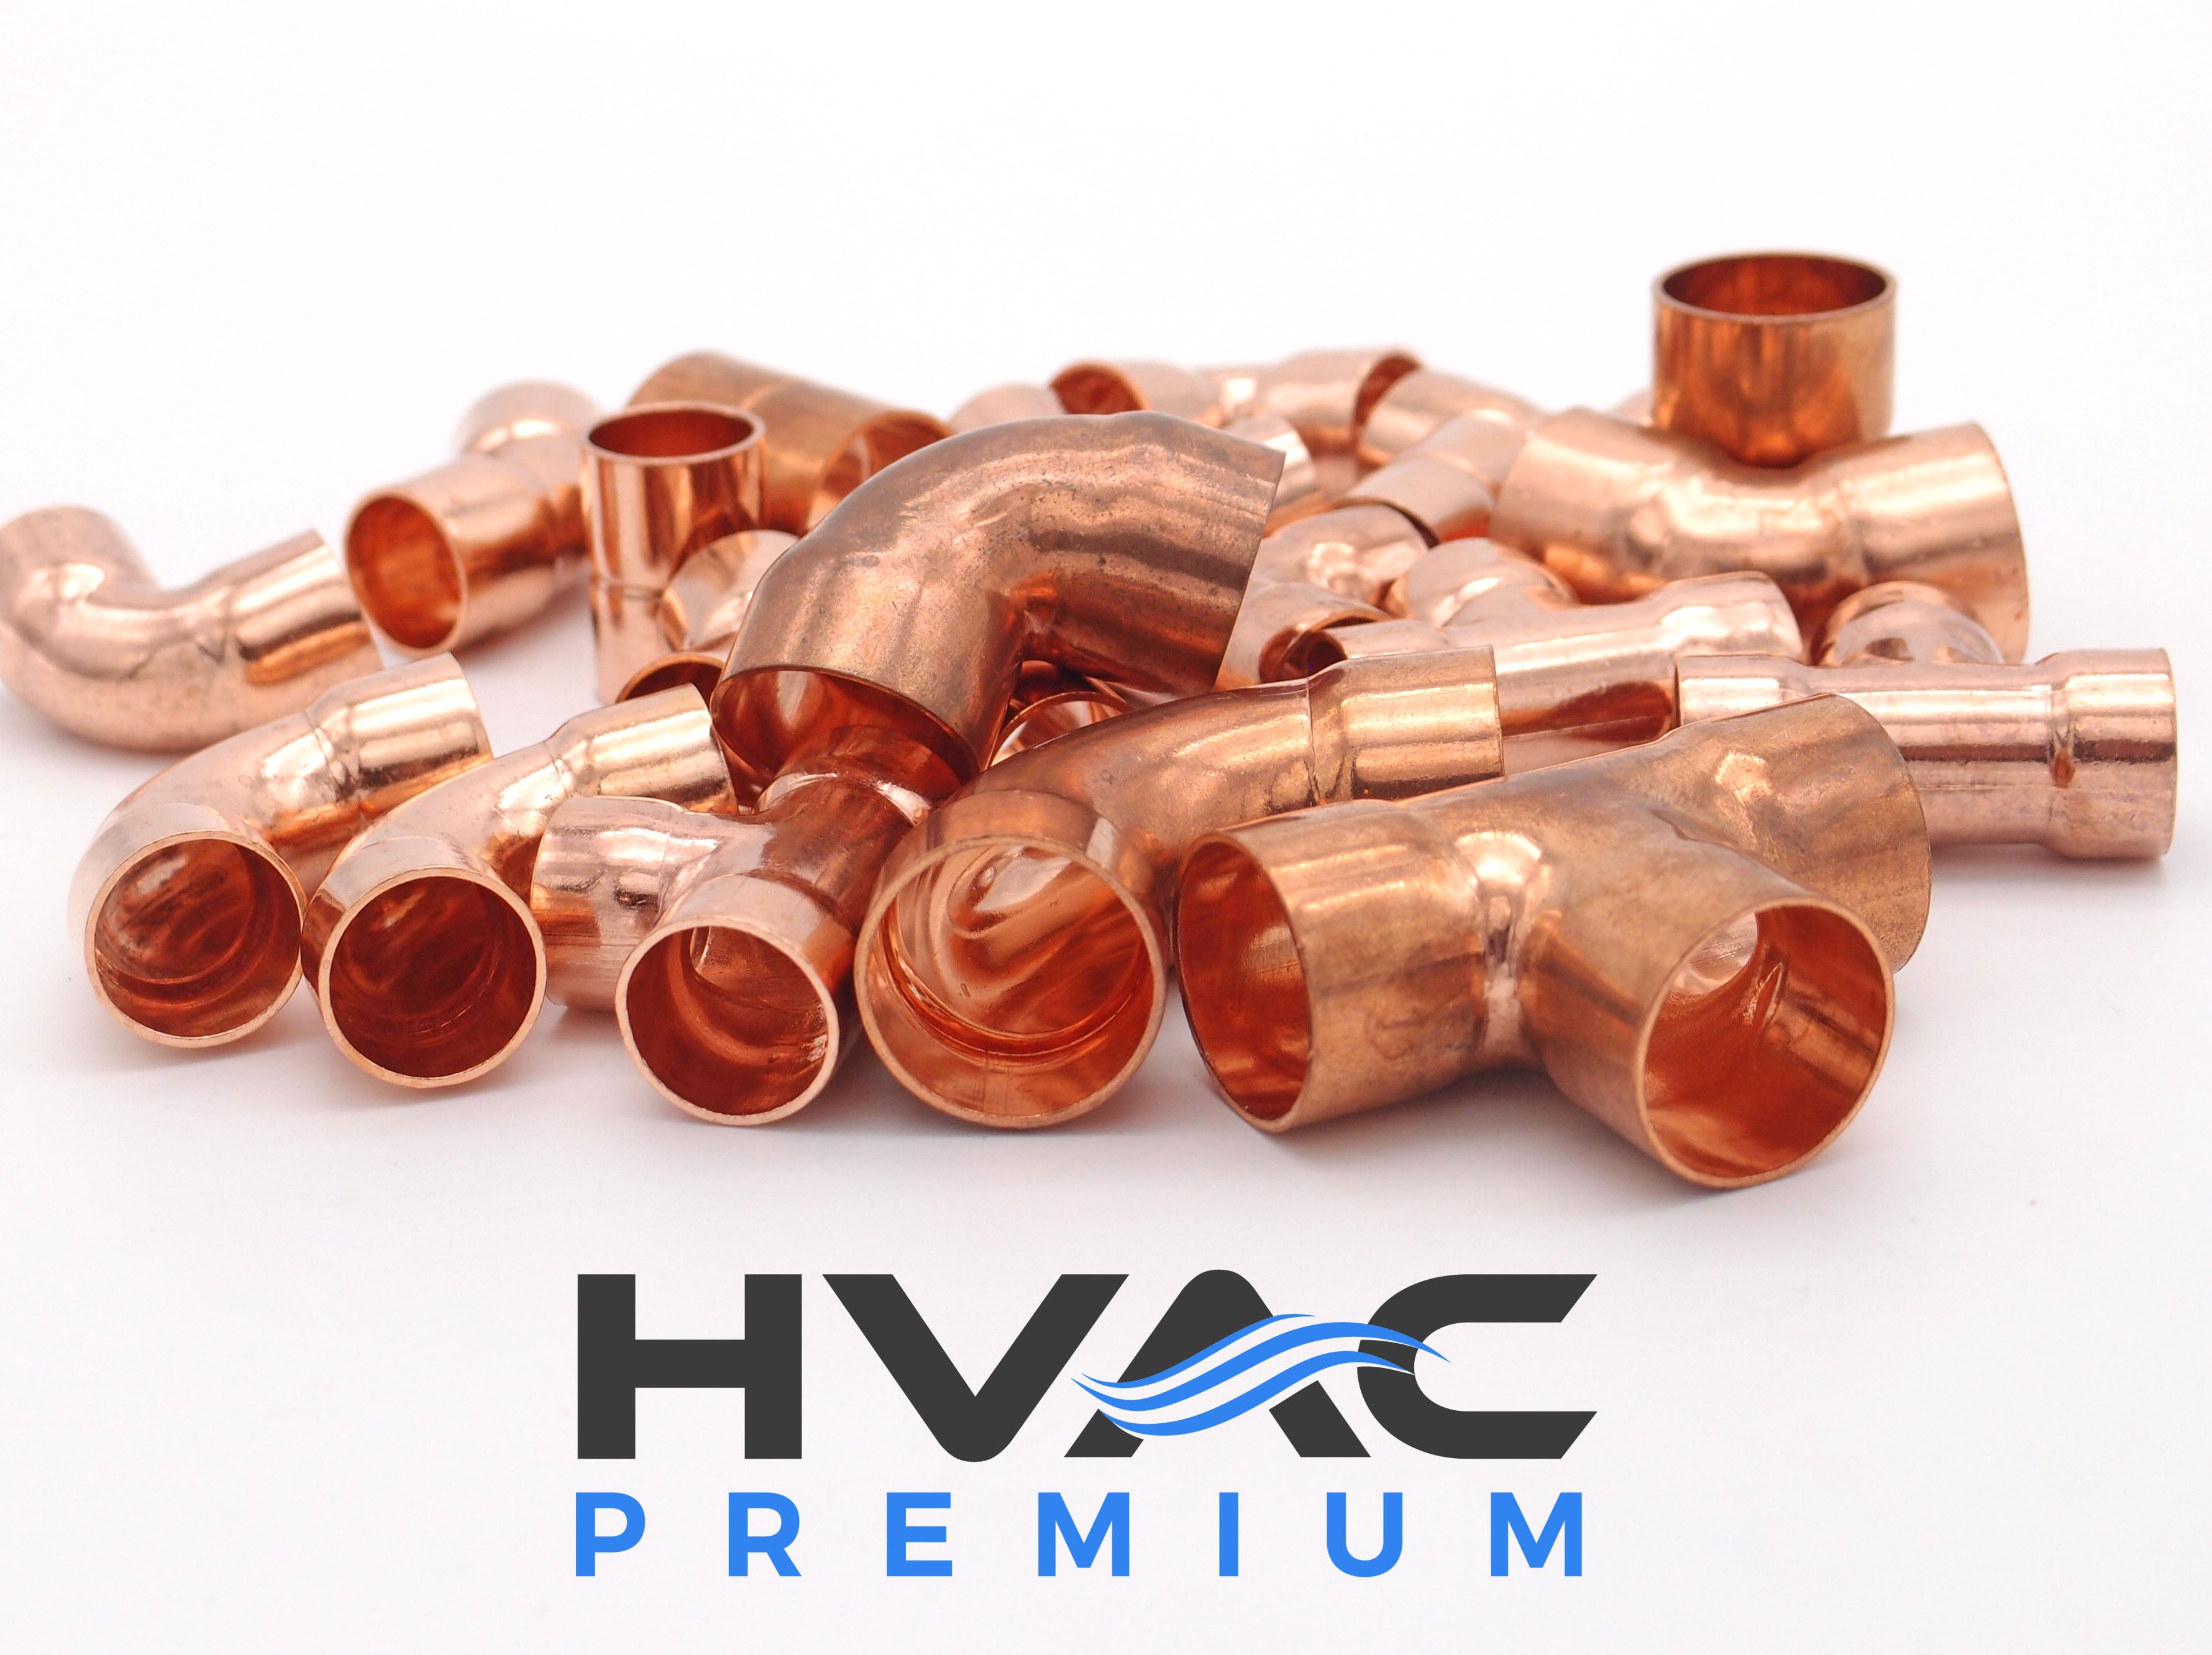 Copper Fitting 1 to 3/4 (HVAC Dimensions) Reducer / Increaser Copper Coupling & HVAC – 7/8 to 5/8 (Plumbing Inner Dimensions) 99.9% Pure Copper - 5 Pack